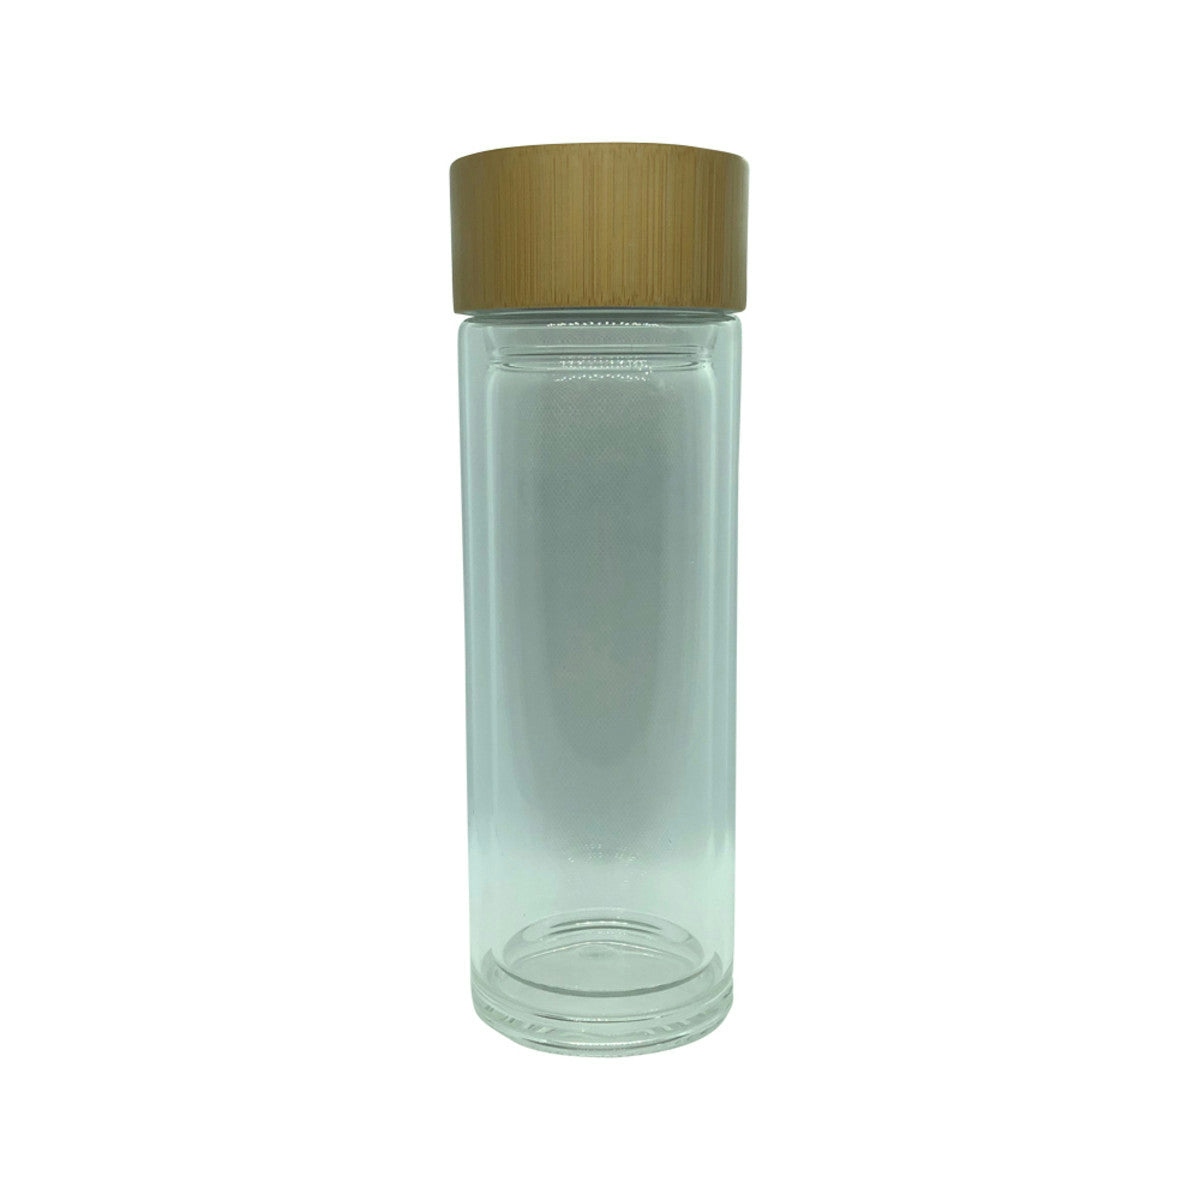 image of Nutra Organics Double Walled Clear Glass Flask 350ml on white background 